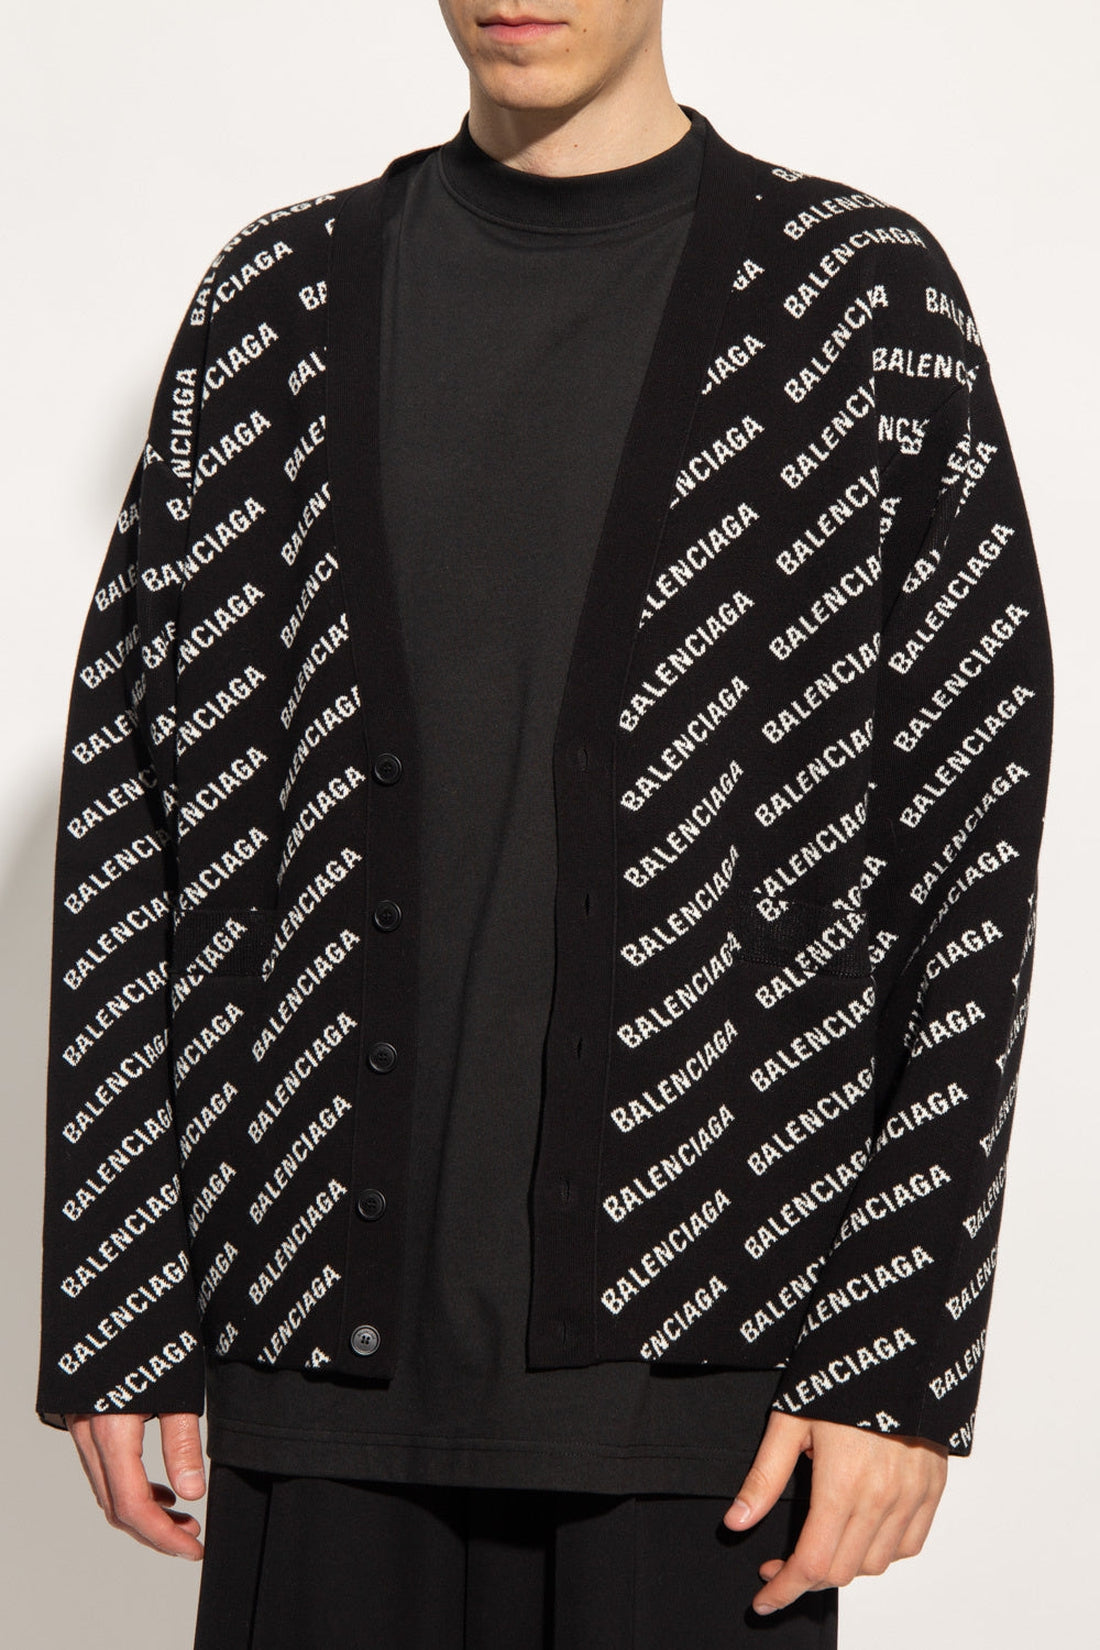 BALENCIAGA-OUTLET-SALE-ALL-OVER CARDIGAN-ARCHIVIST